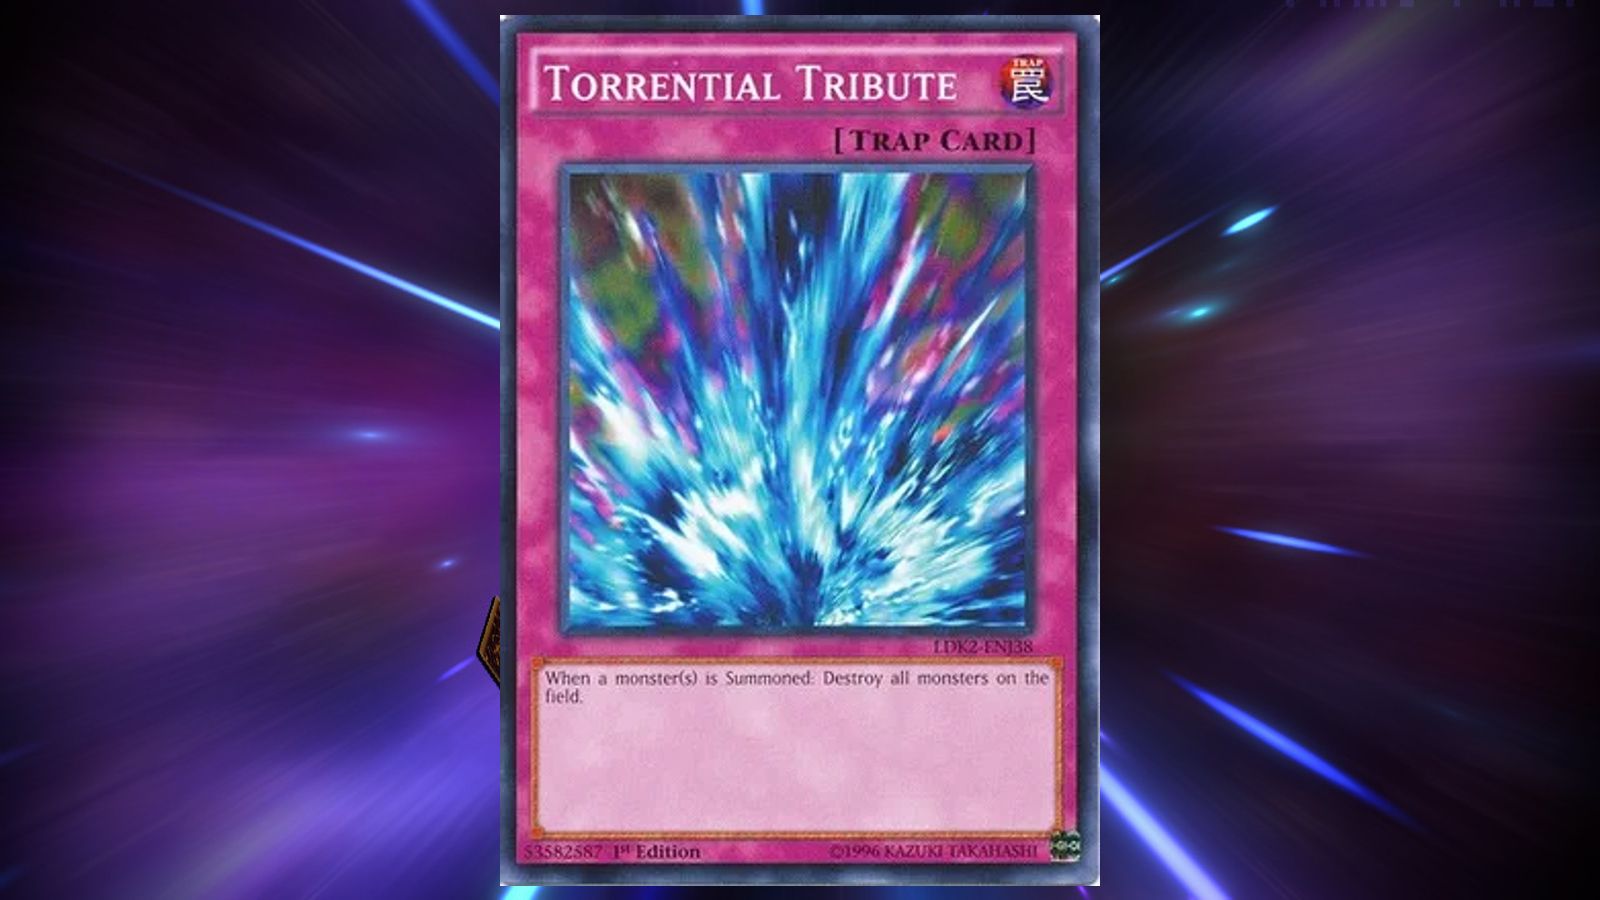 Torrential Tribute is a great card to craft for any Yu-Gi-Oh! Master Duel player.